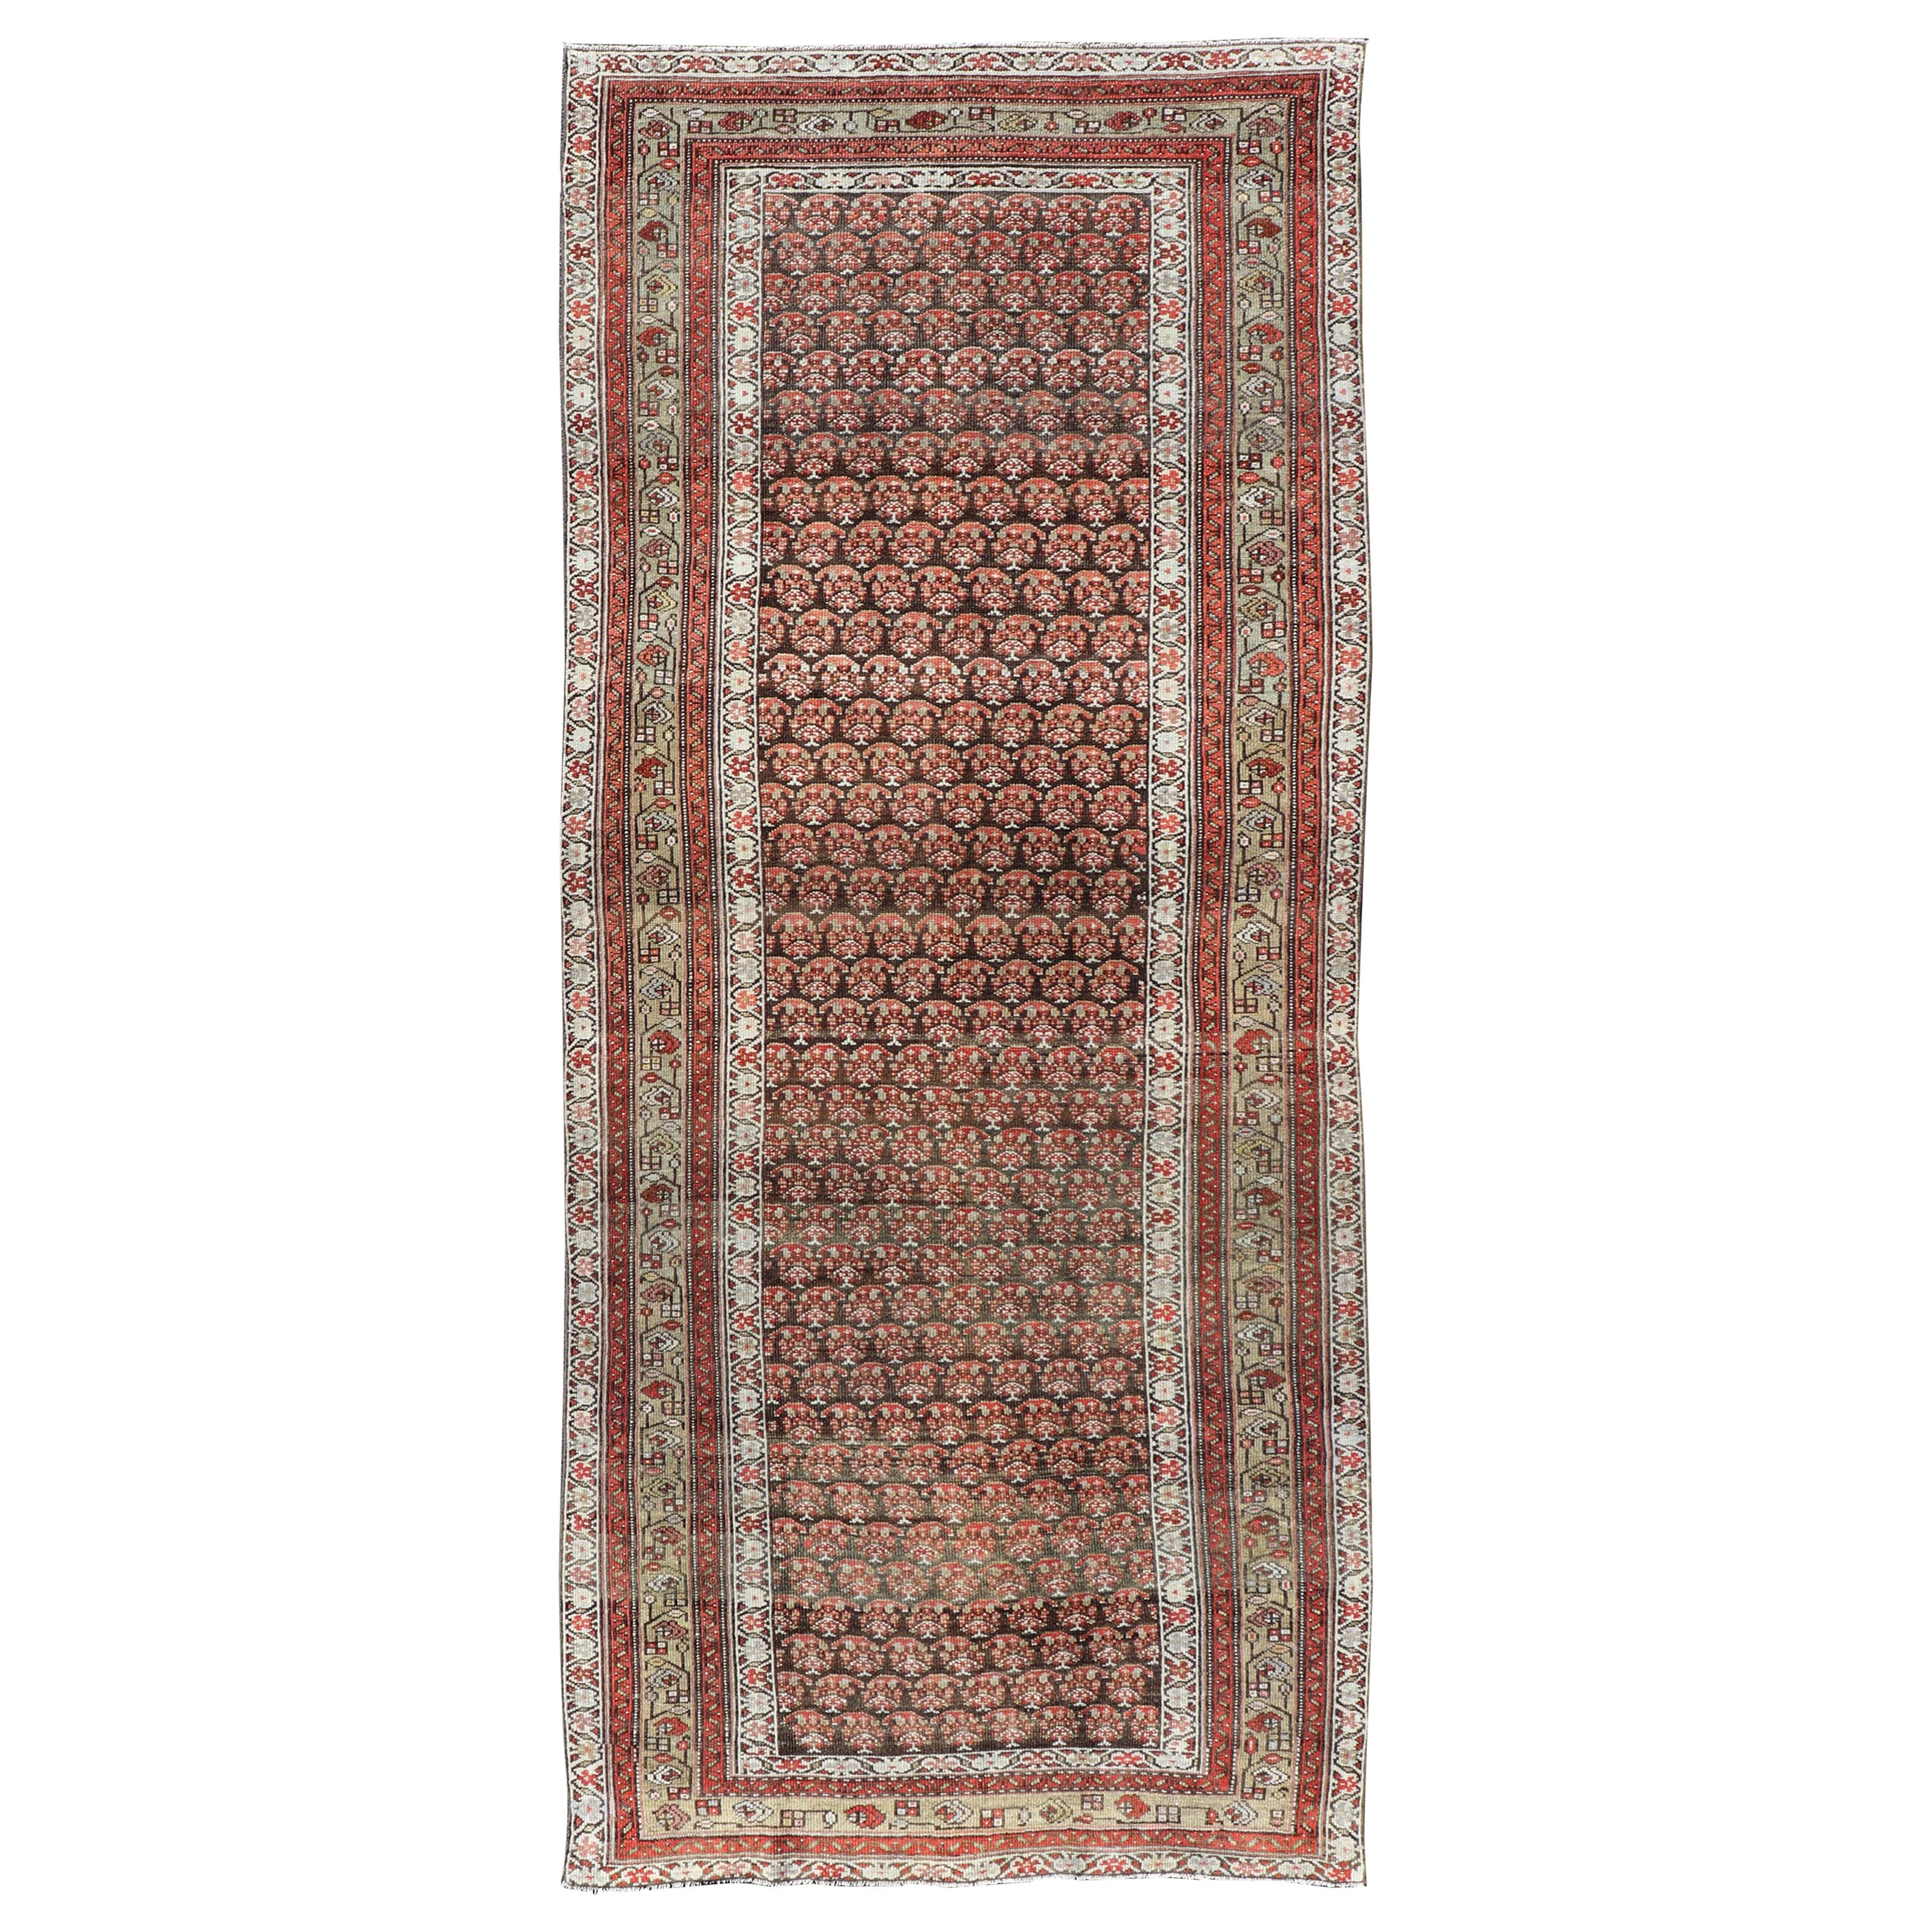 Antique Kurdish Gallery Runner with All-Over Paisley Design in Brown, Red, Green